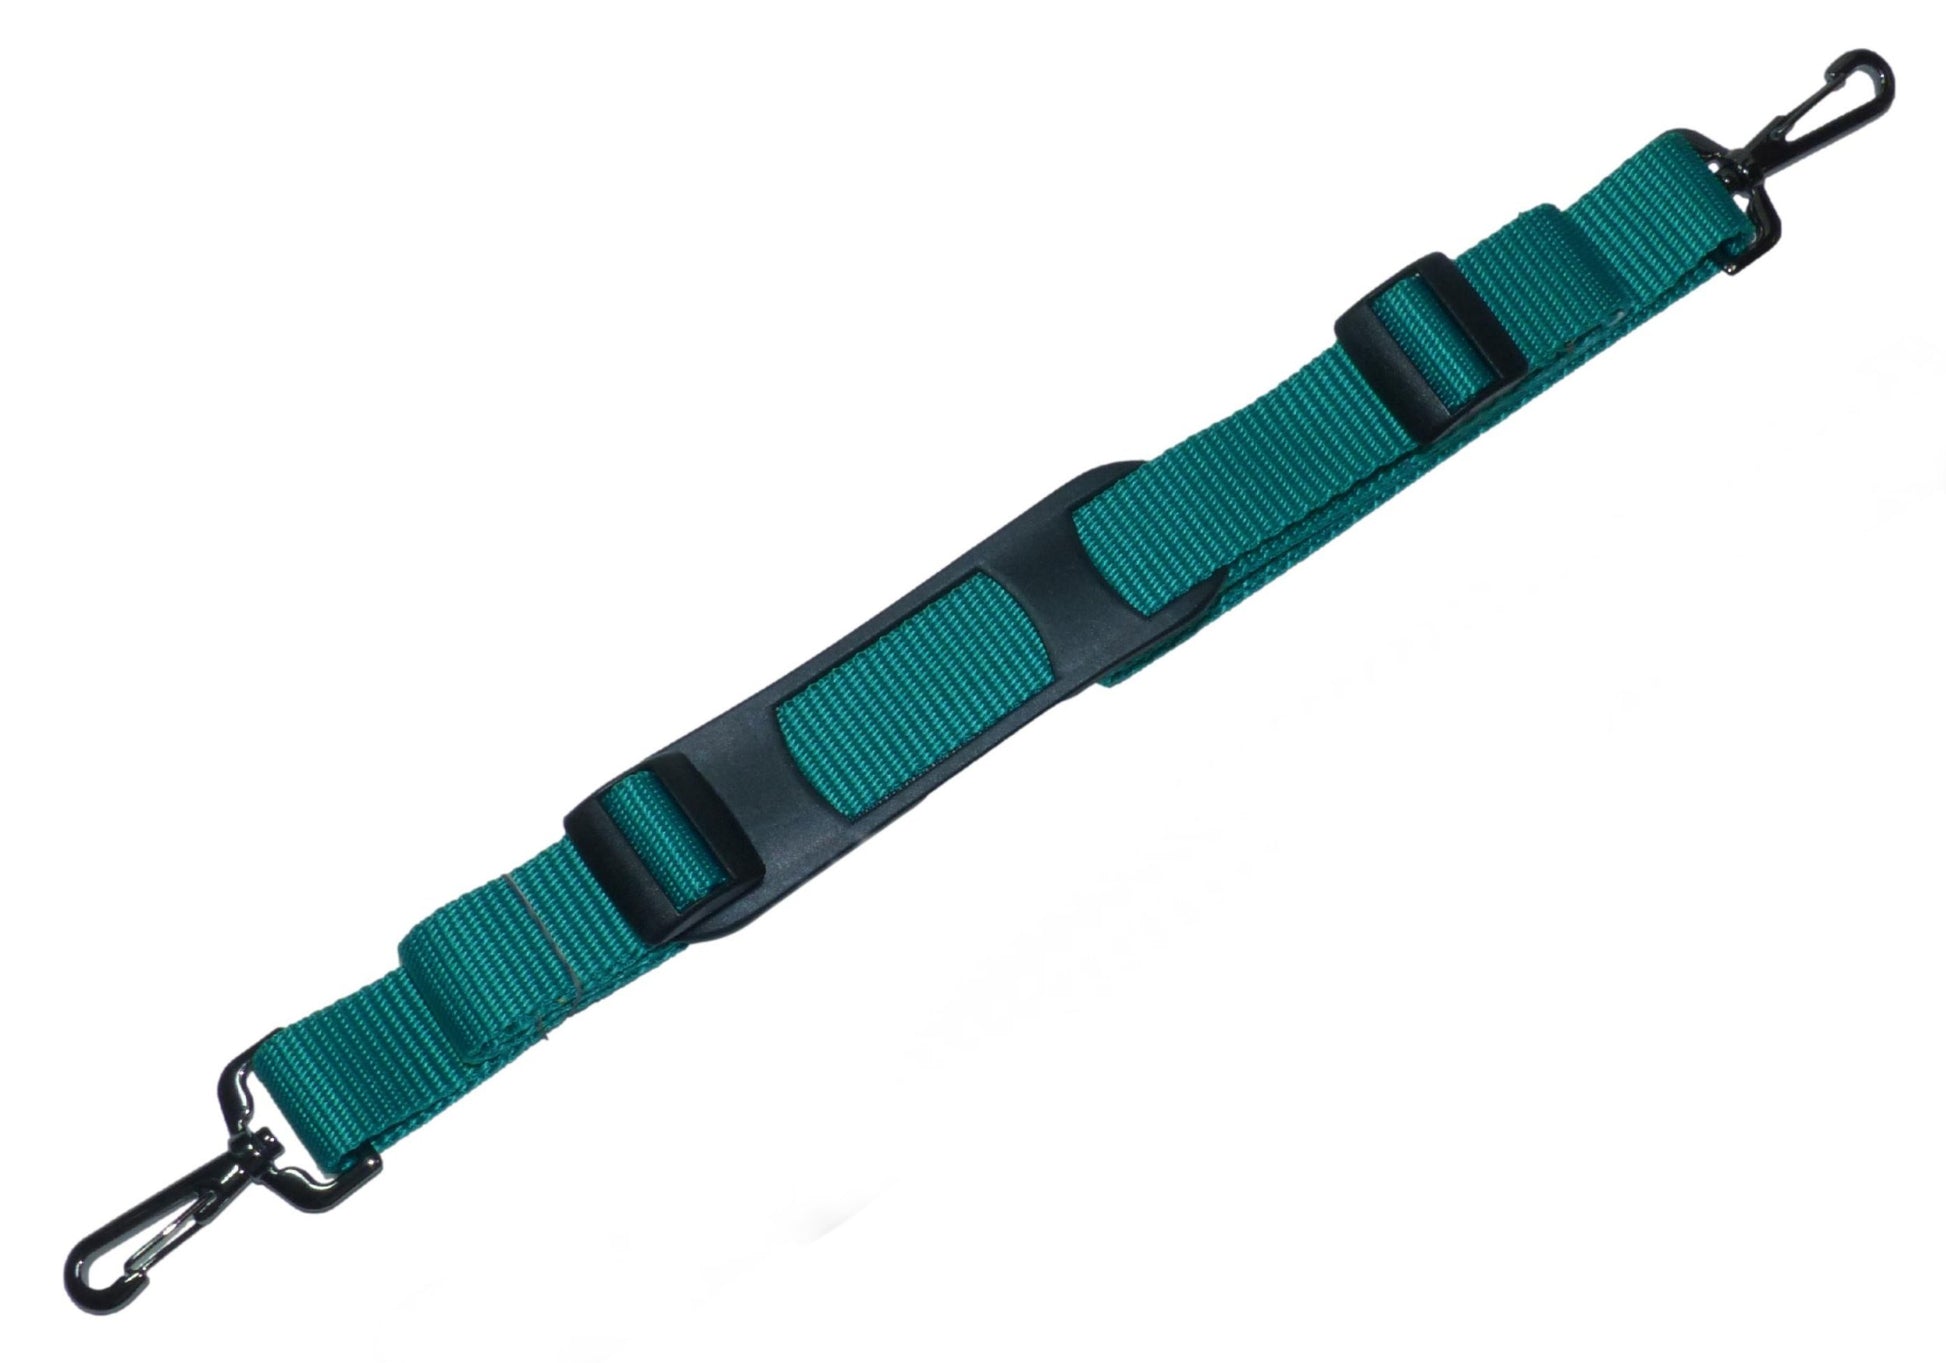 Benristraps 25mm Bag Strap with Metal Buckles and Shoulder Pad, 150cm in emerald green